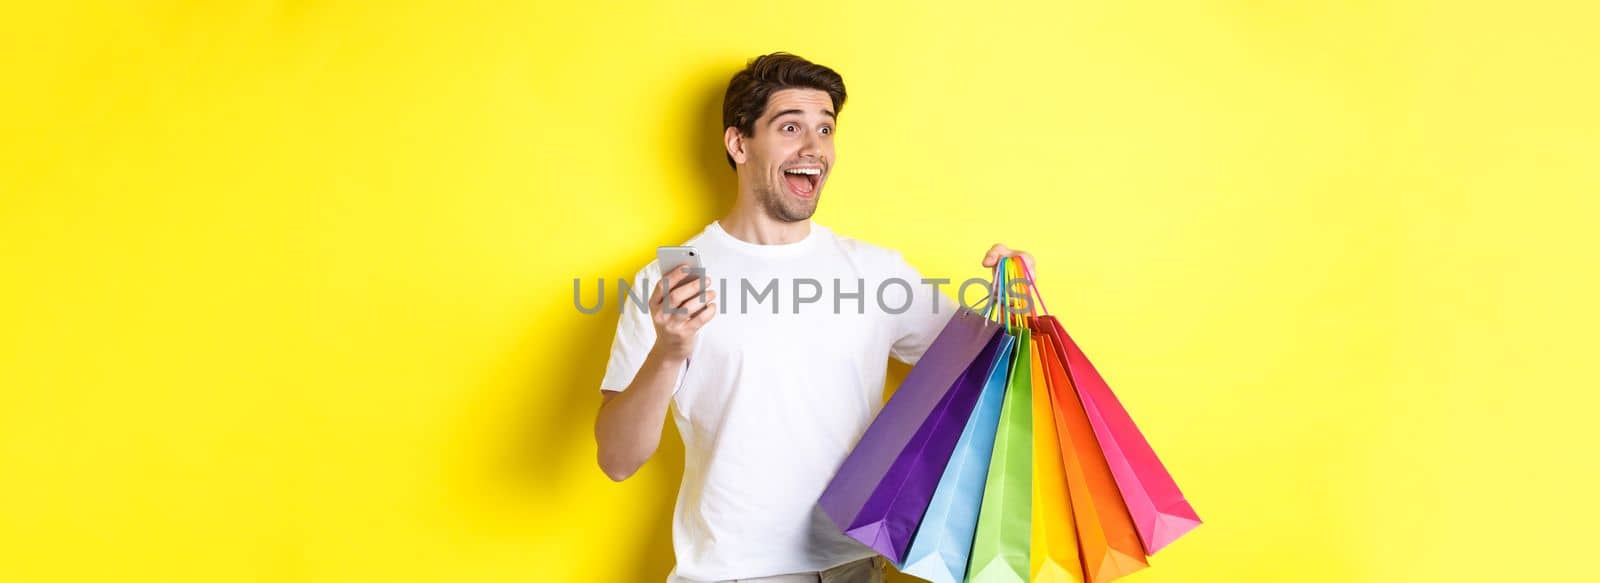 Concept of mobile banking and cashback. Happy man looking amazed, holding shopping bags and smartphone, yellow background.